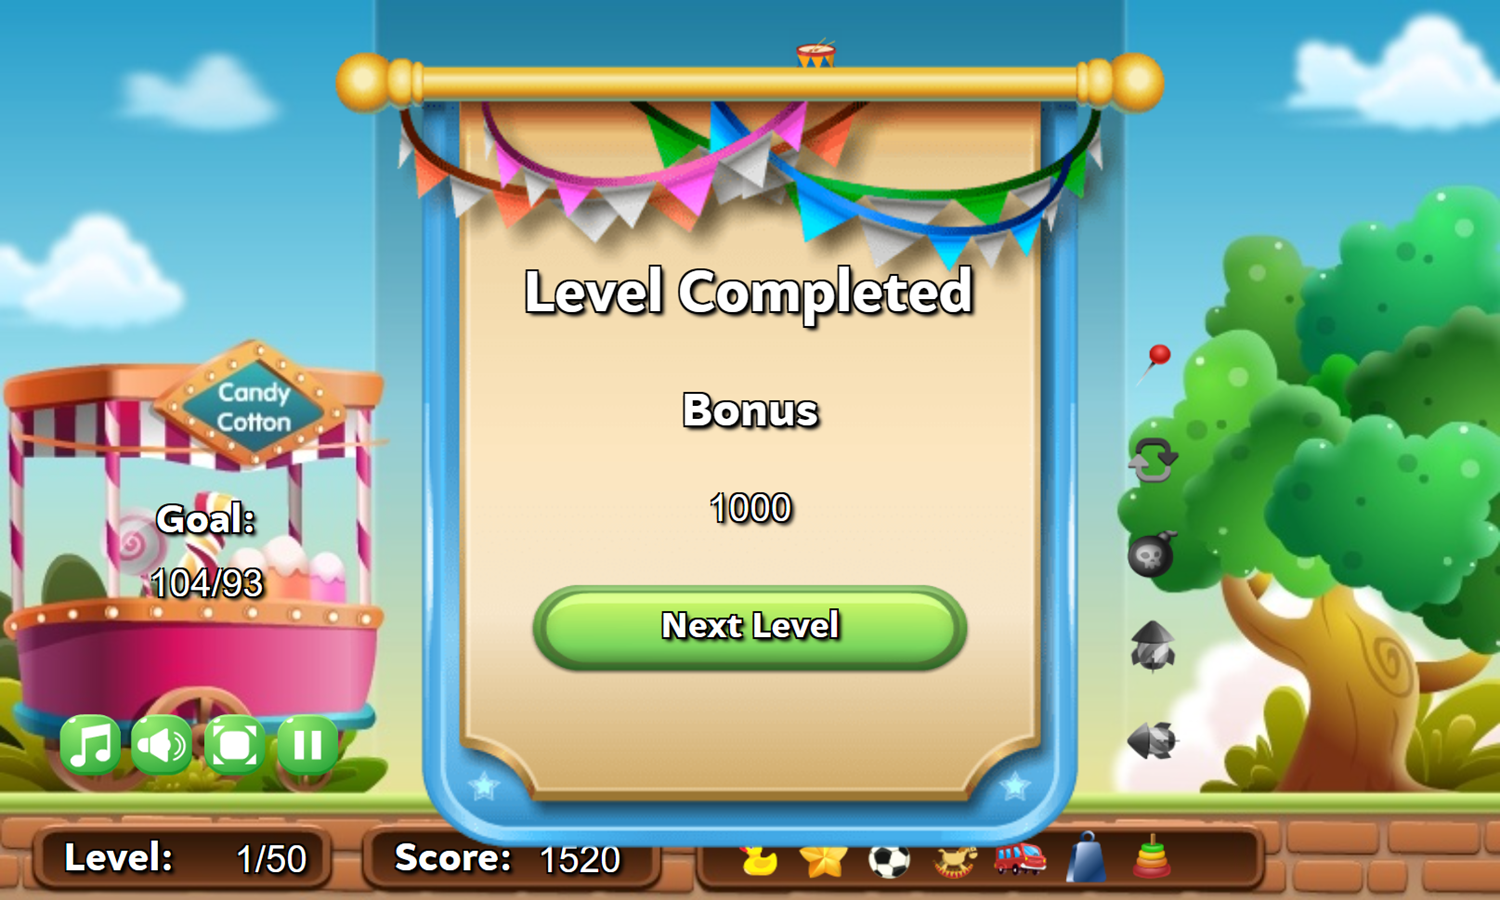 Balloon Pop Game Level Completed Screenshot.